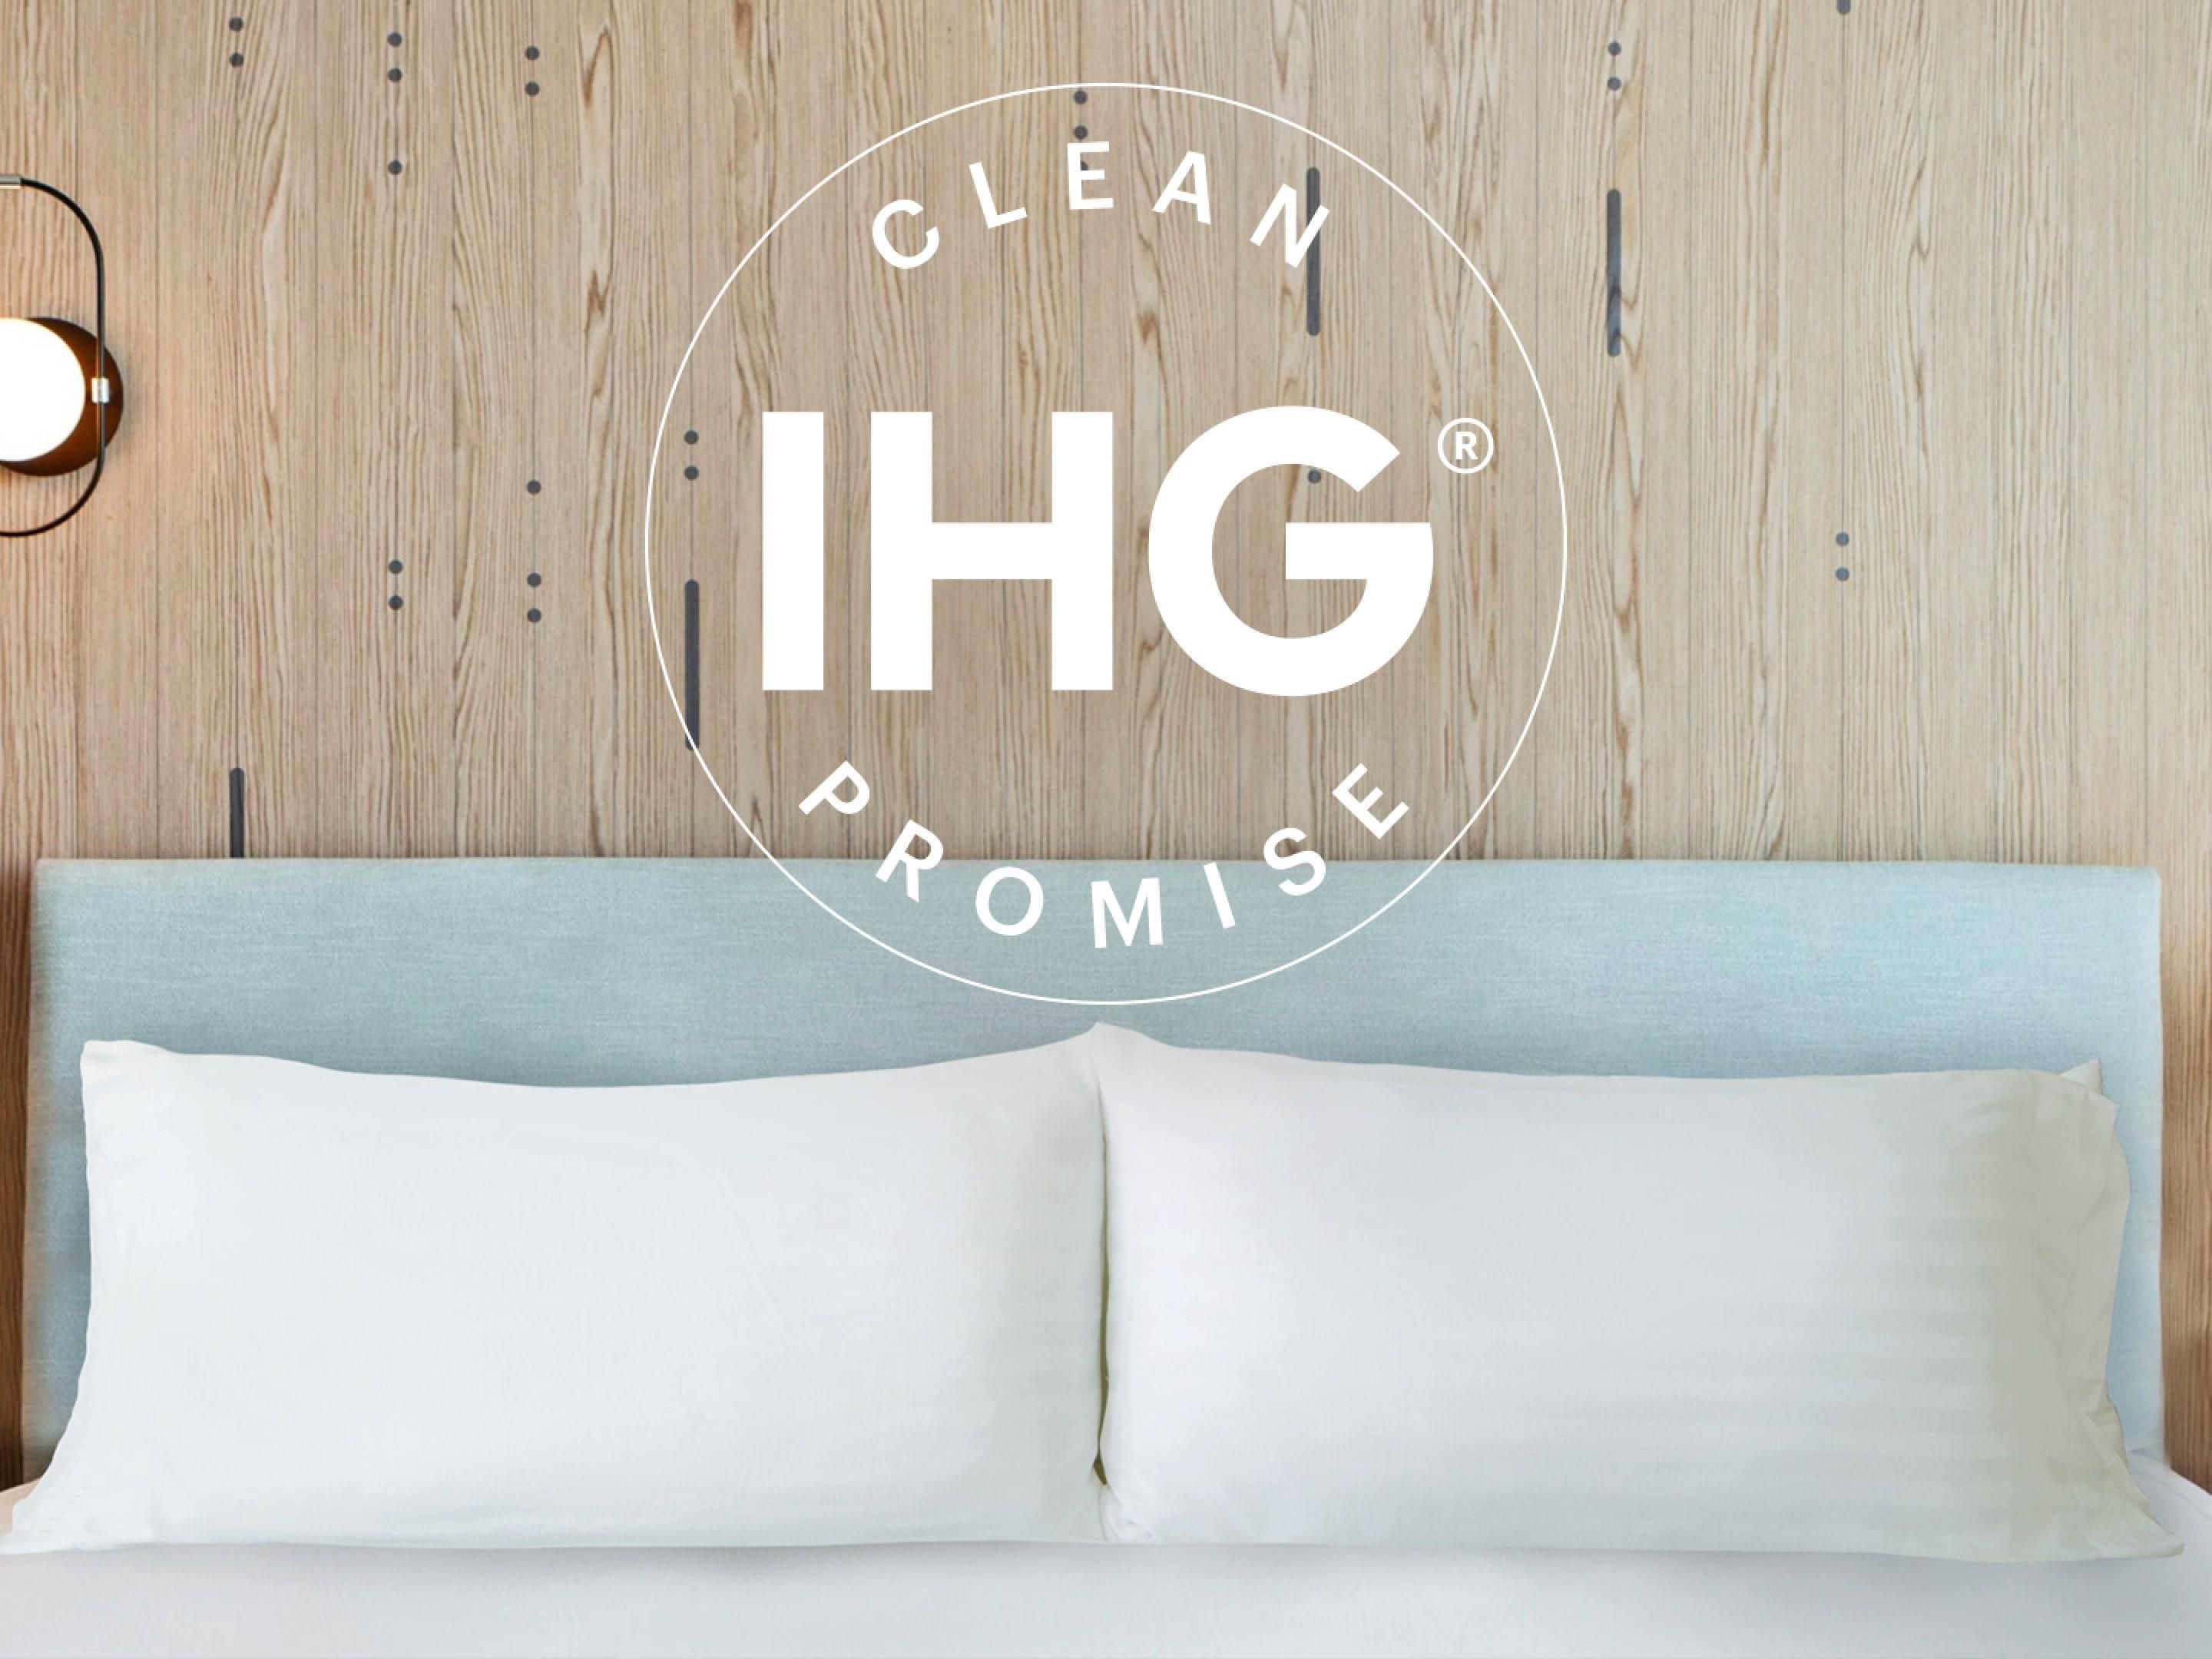 As the world adjusts to new travel norms and expectations, we’re enhancing the experience for you – our hotel guests – by redefining cleanliness and supporting your wellbeing throughout your stay.